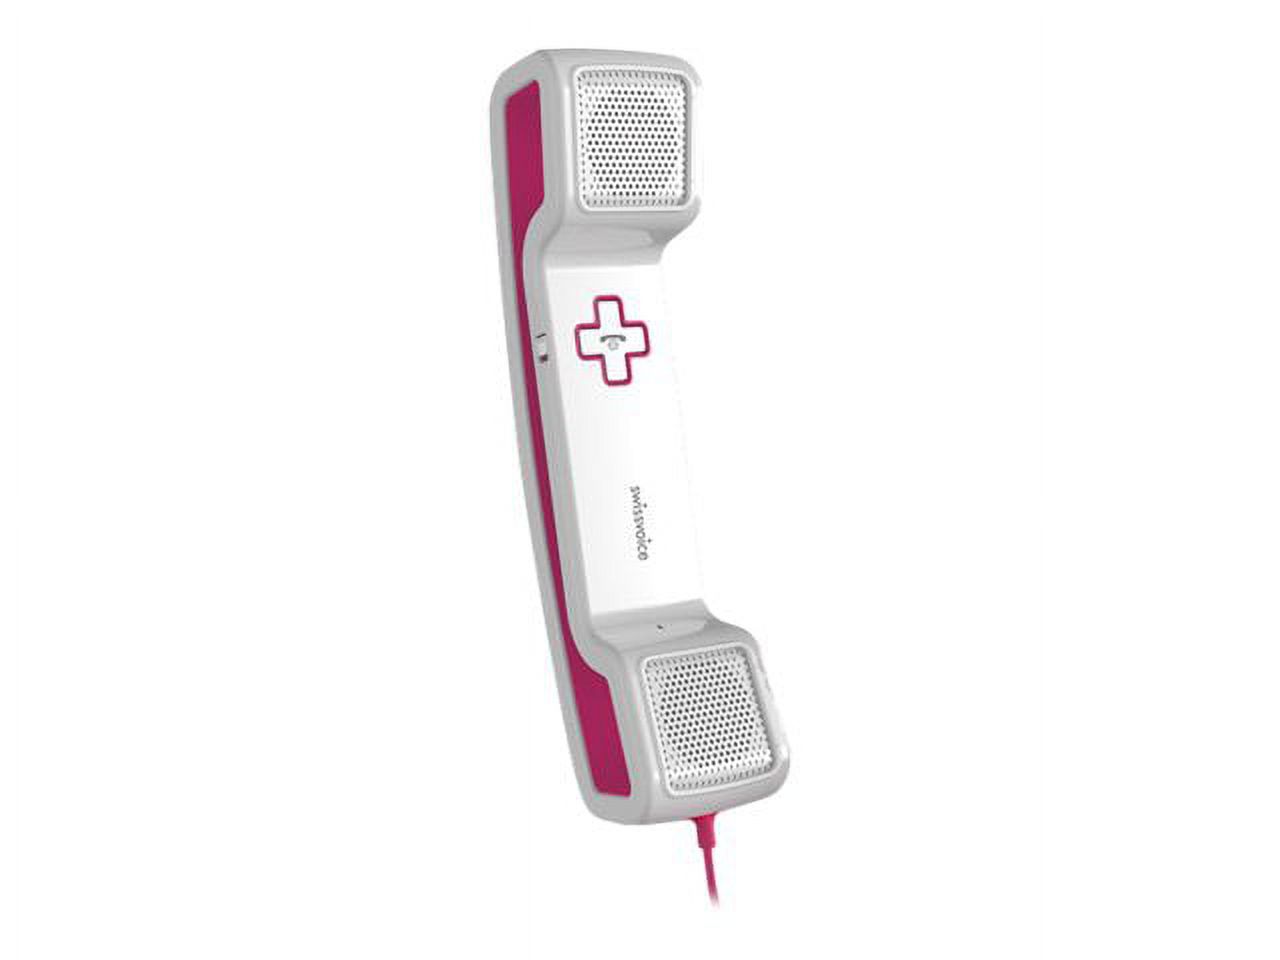 Swissvoice ePure CH05 - Handset for cellular phone - white, pink - for Apple iPhone 5 - image 3 of 4